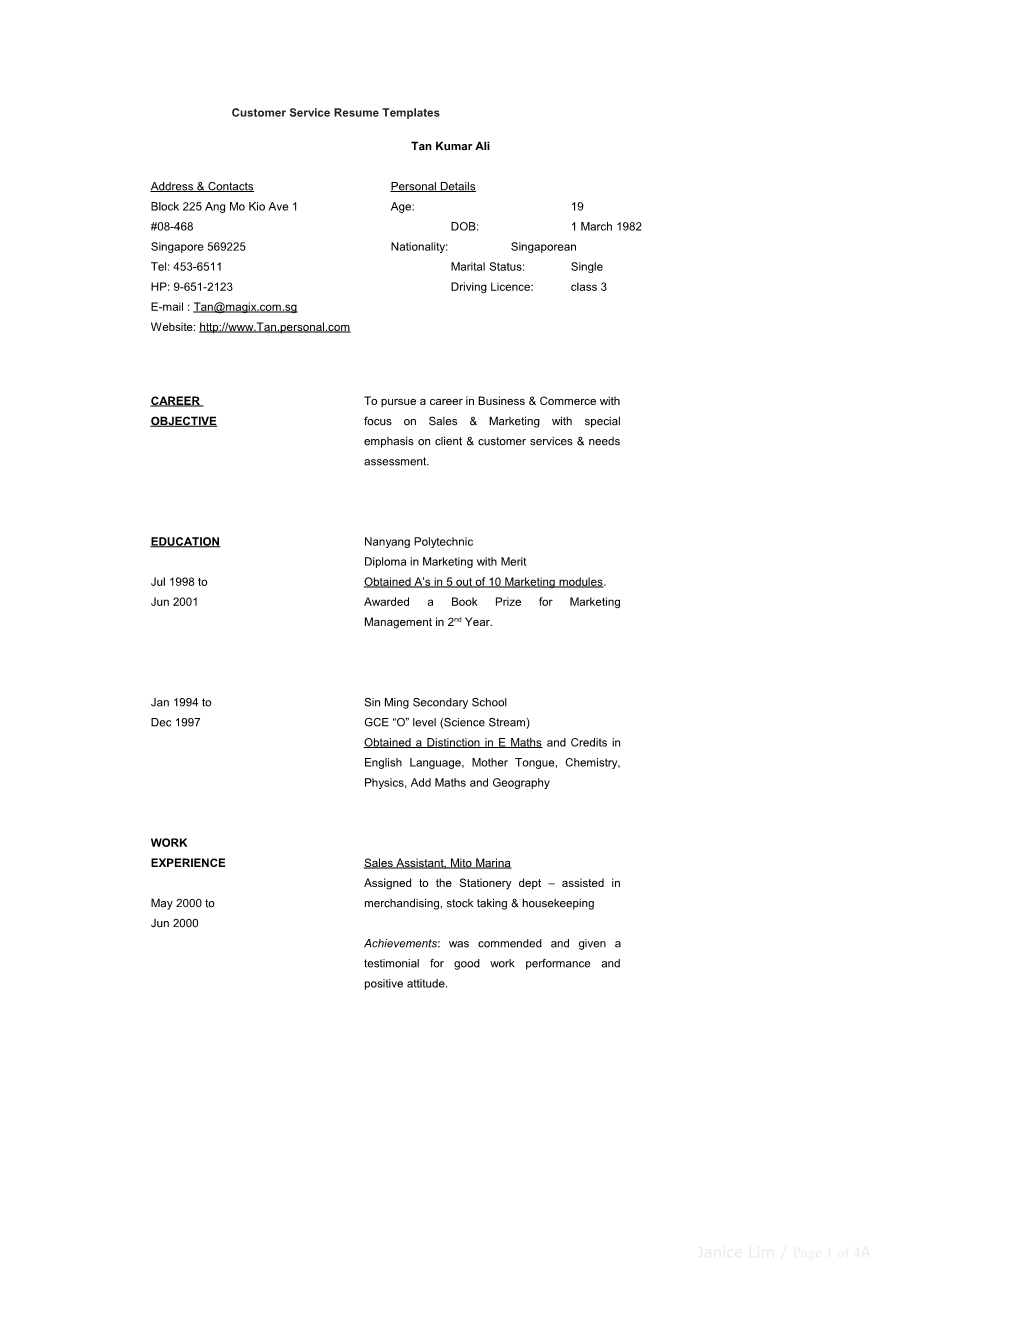 Sample & Format of a Resume